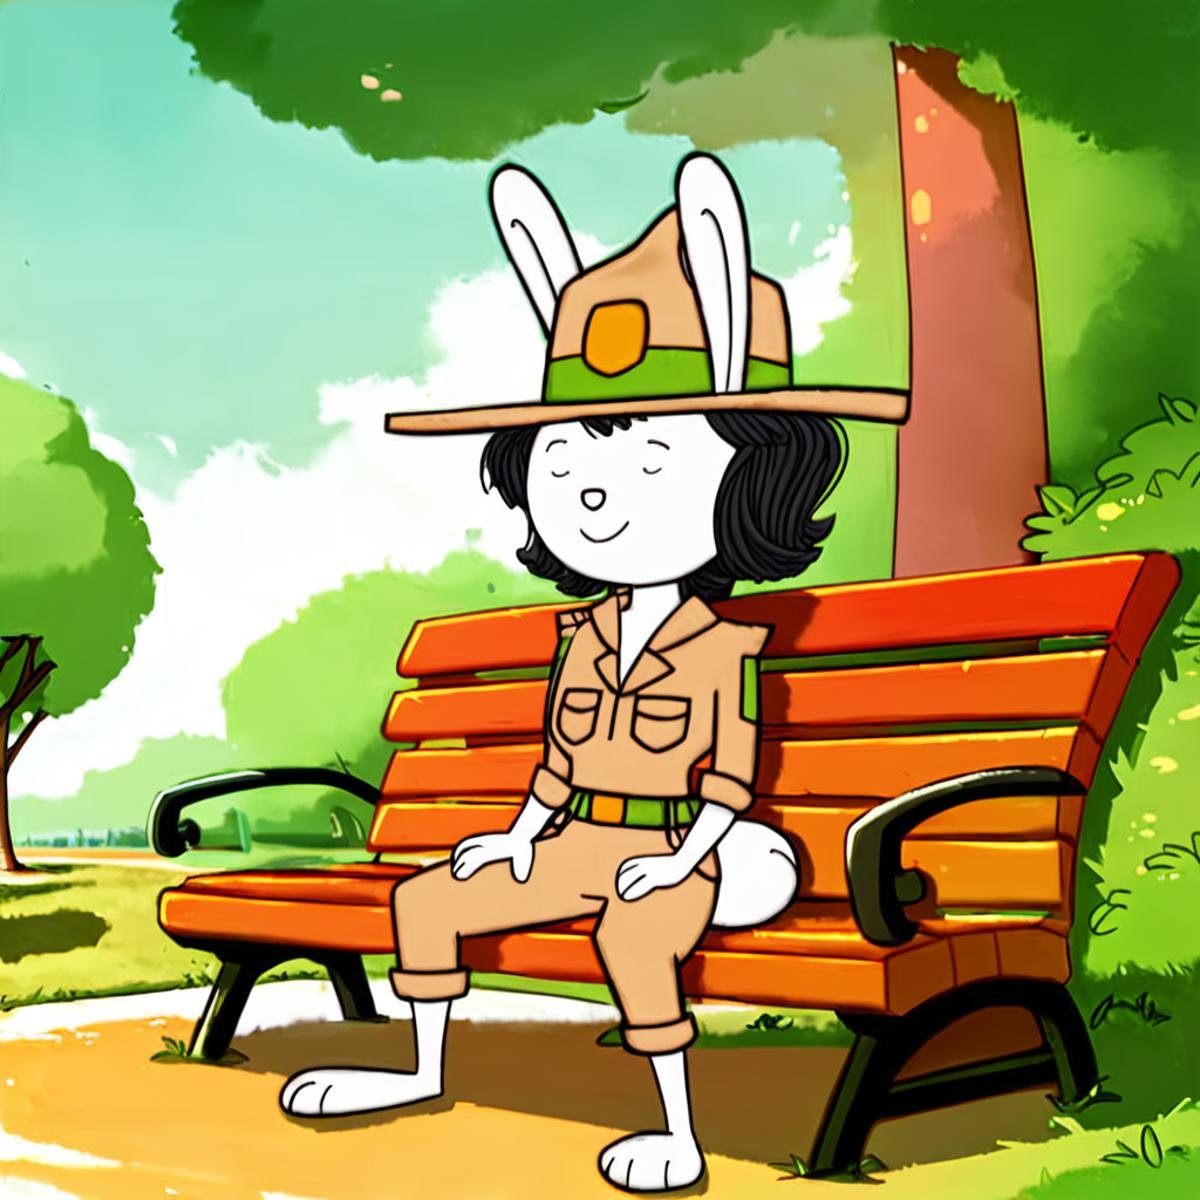 score_9, score_8_up, score_7_up, _r4b_, ranger uniform, seated, spread legs, eyes closed, resting arm on chairback, outdoors, day, bench, park, trail, sky, trees <lora:_r4b_:1>